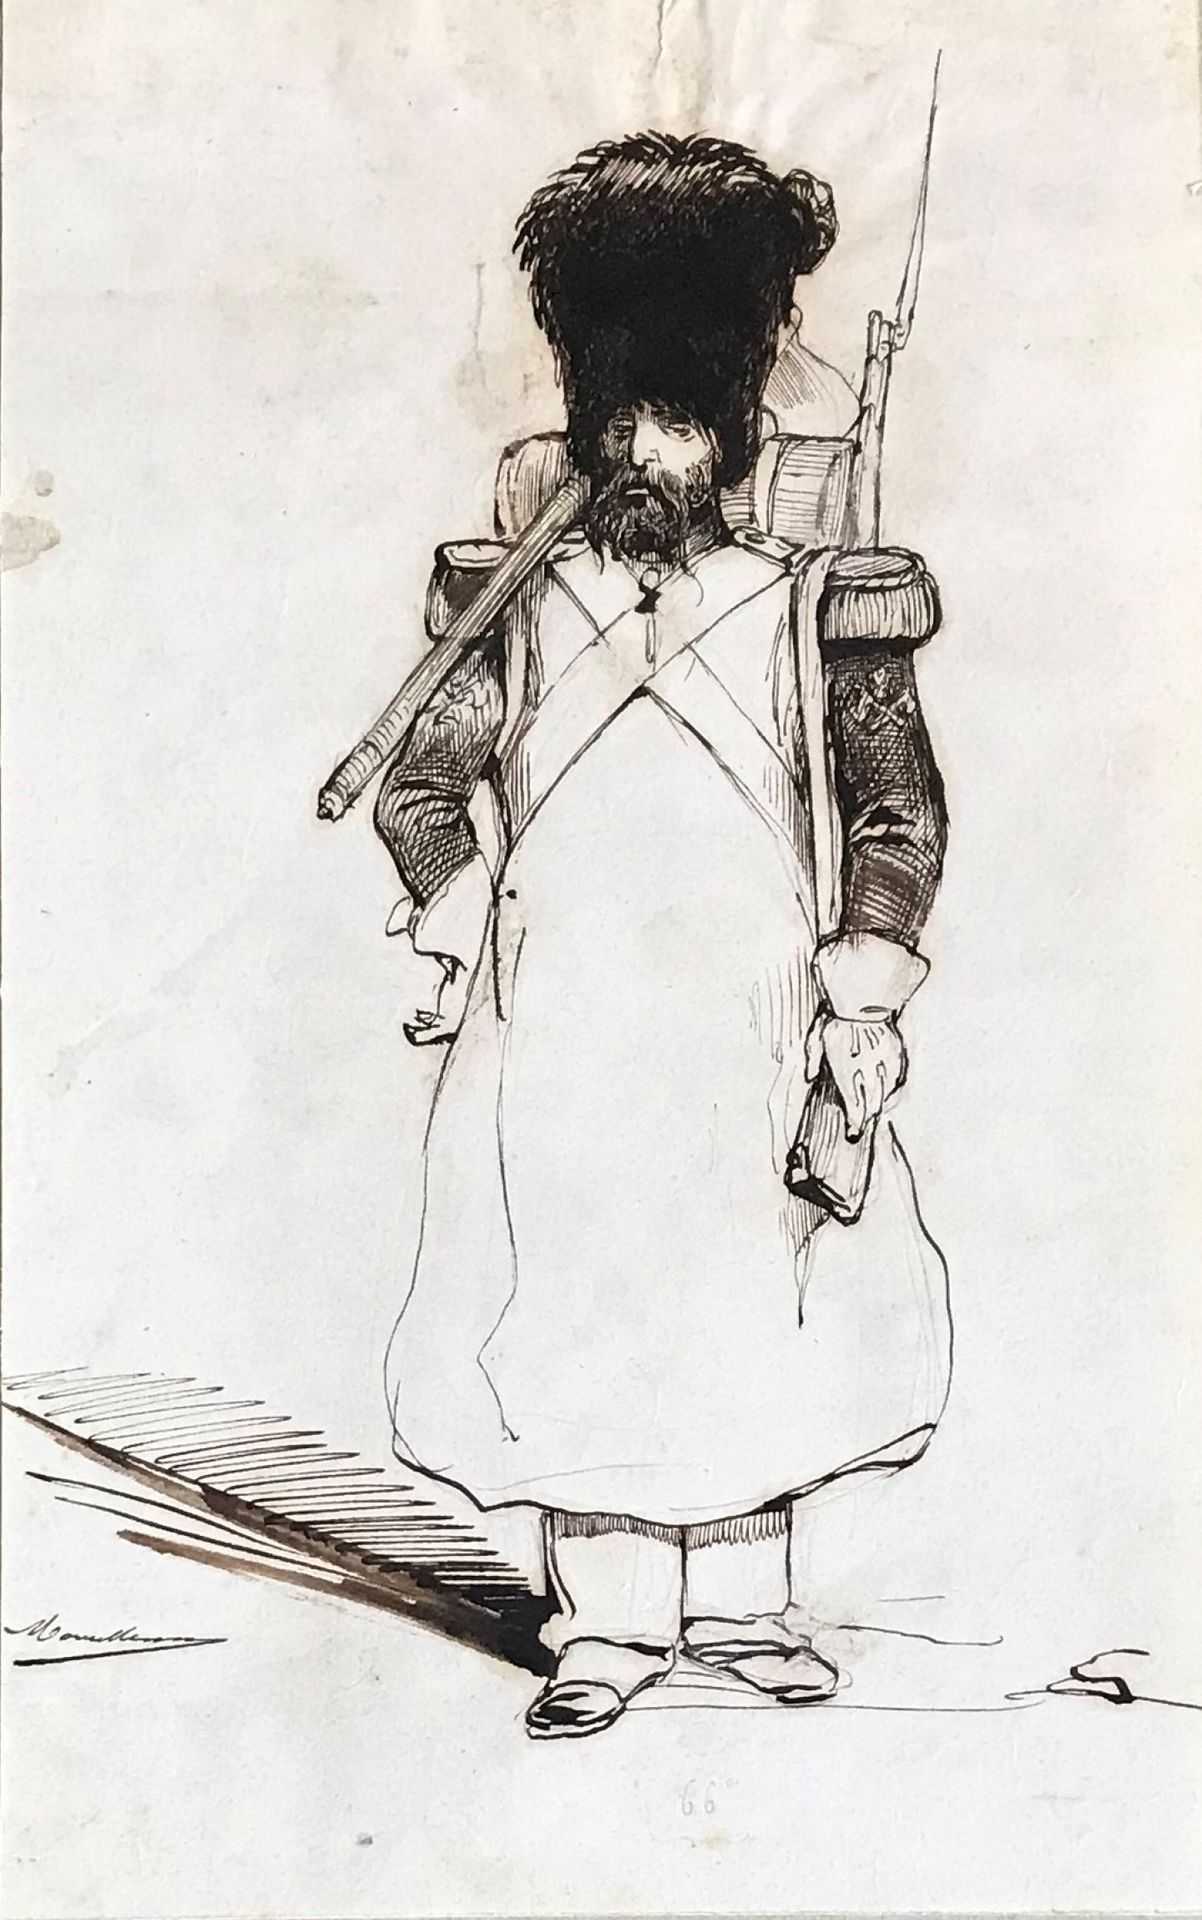 BOUILLERON Adolphe BOUILLERON ( 1820 - 1881)

Grenadier of the Empire

Drawing i&hellip;